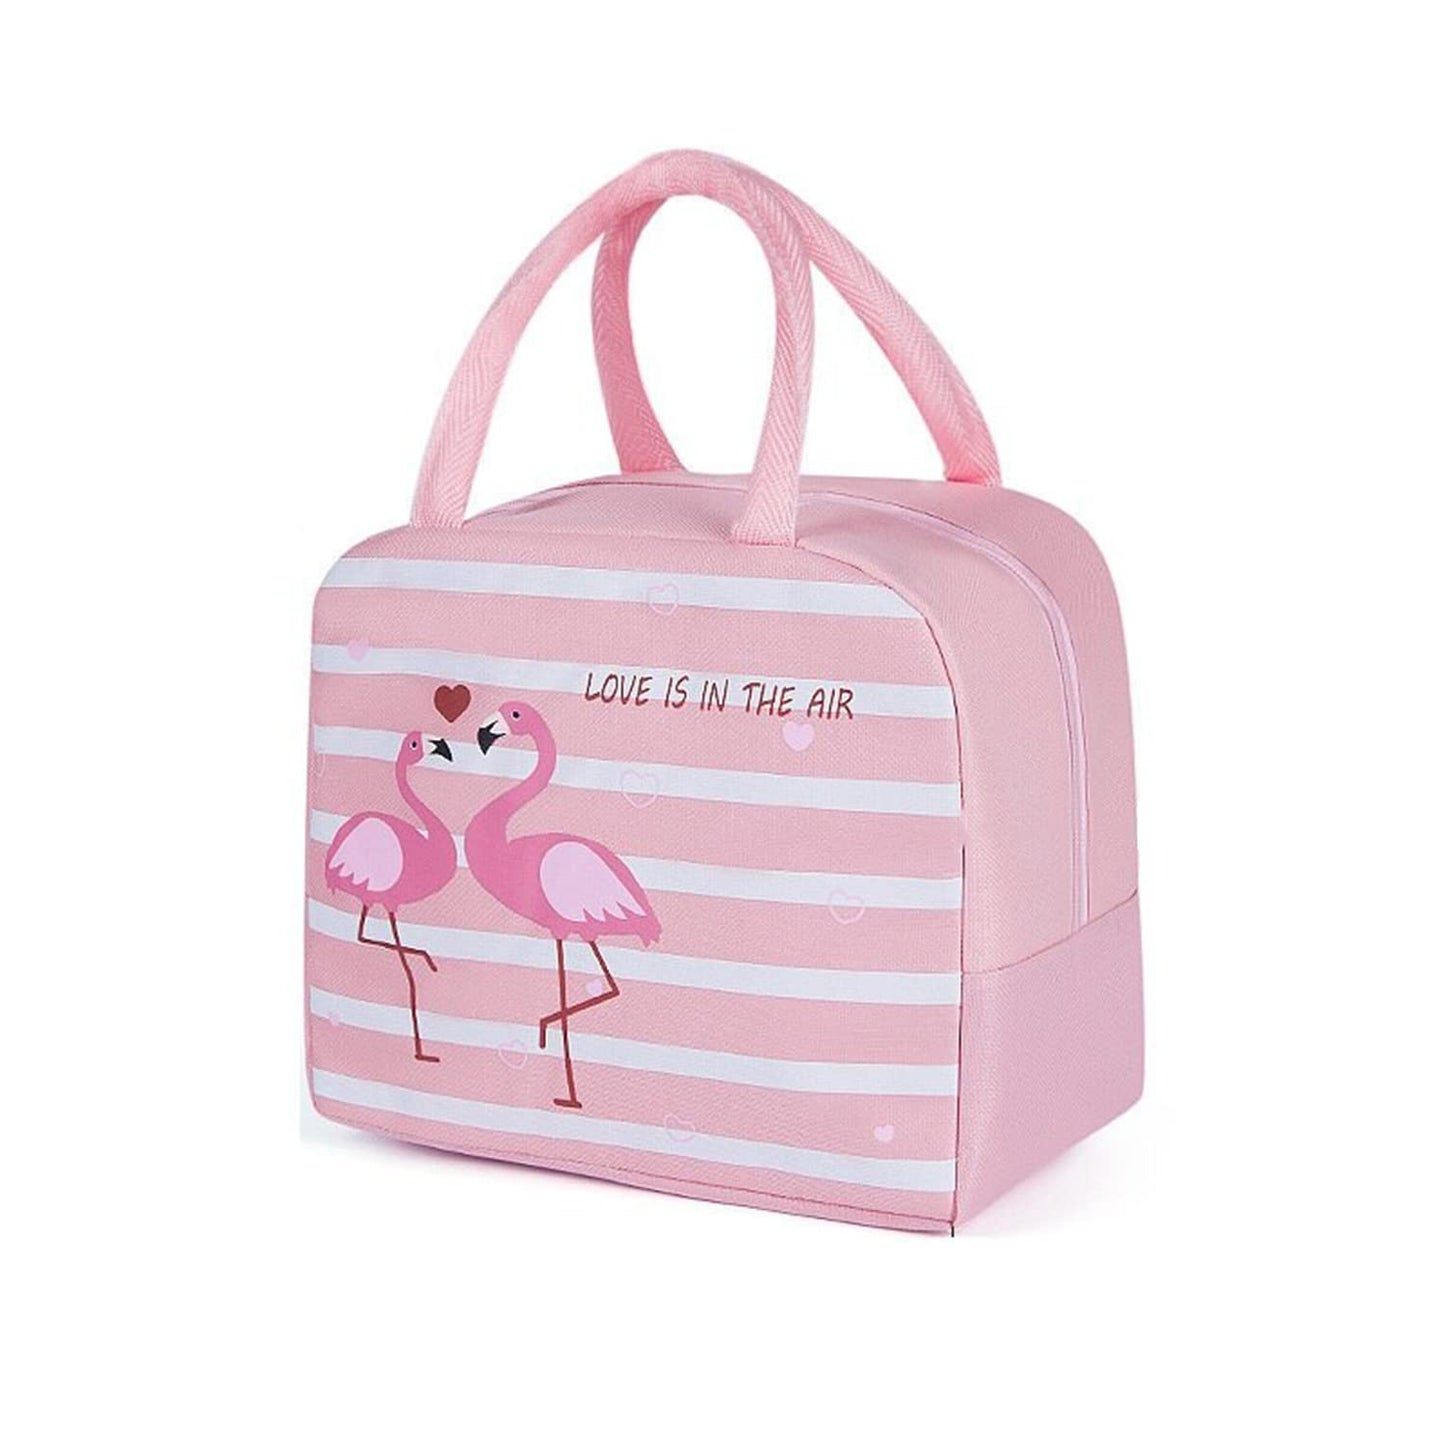 Cute Animal Printed Insulated Lunch Bags for Kids,Women